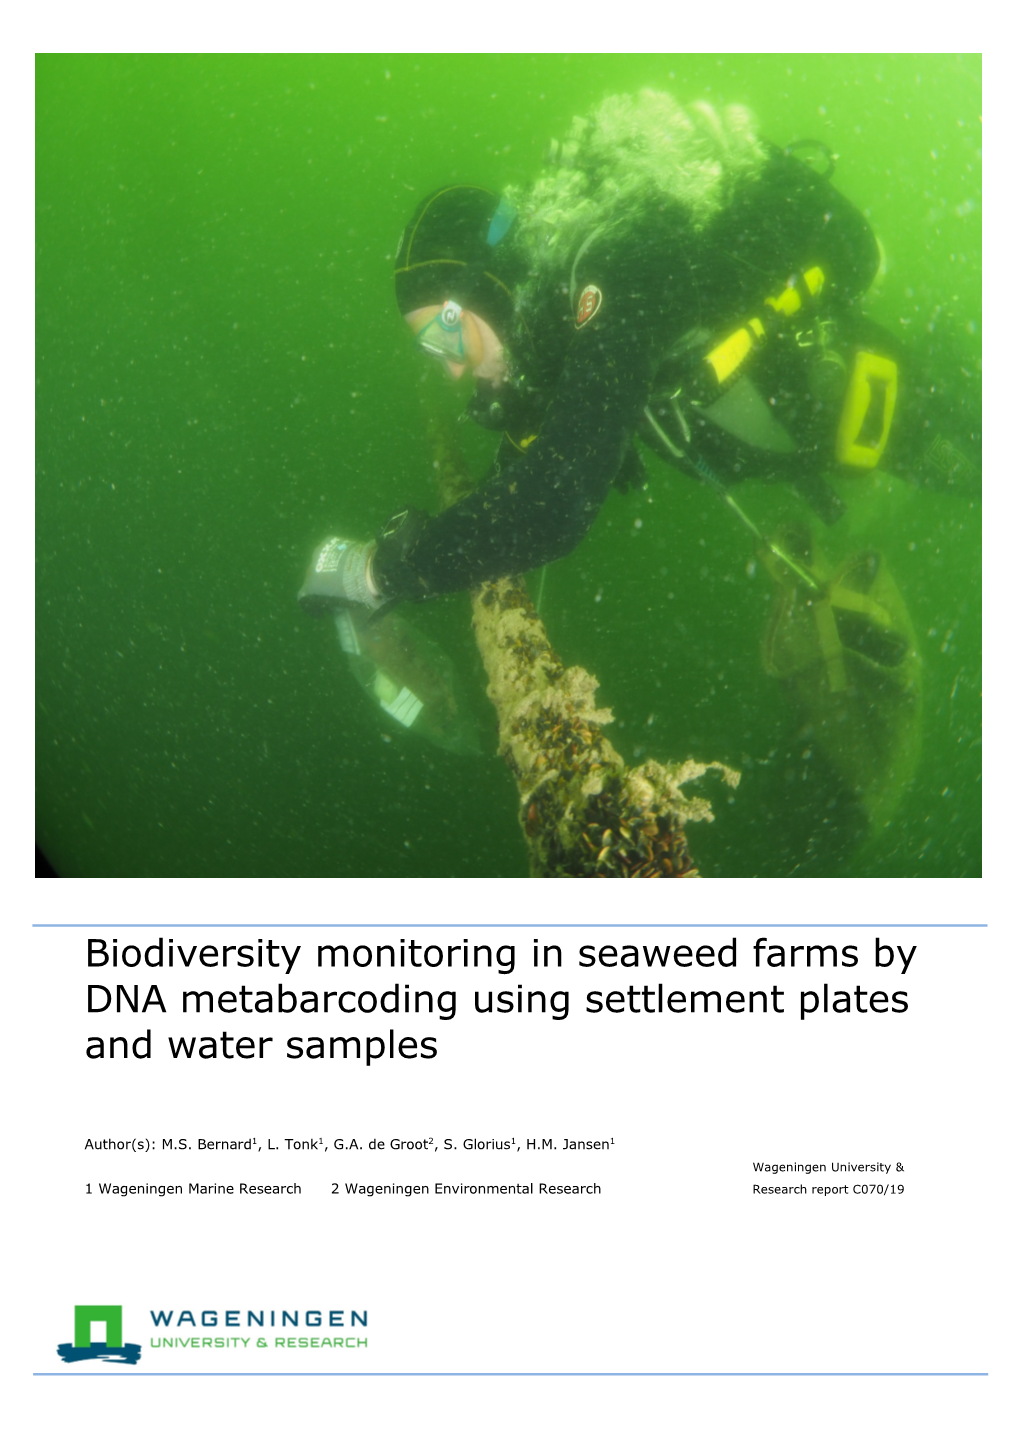 Biodiversity Monitoring in Seaweed Farms by DNA Metabarcoding Using Settlement Plates and Water Samples